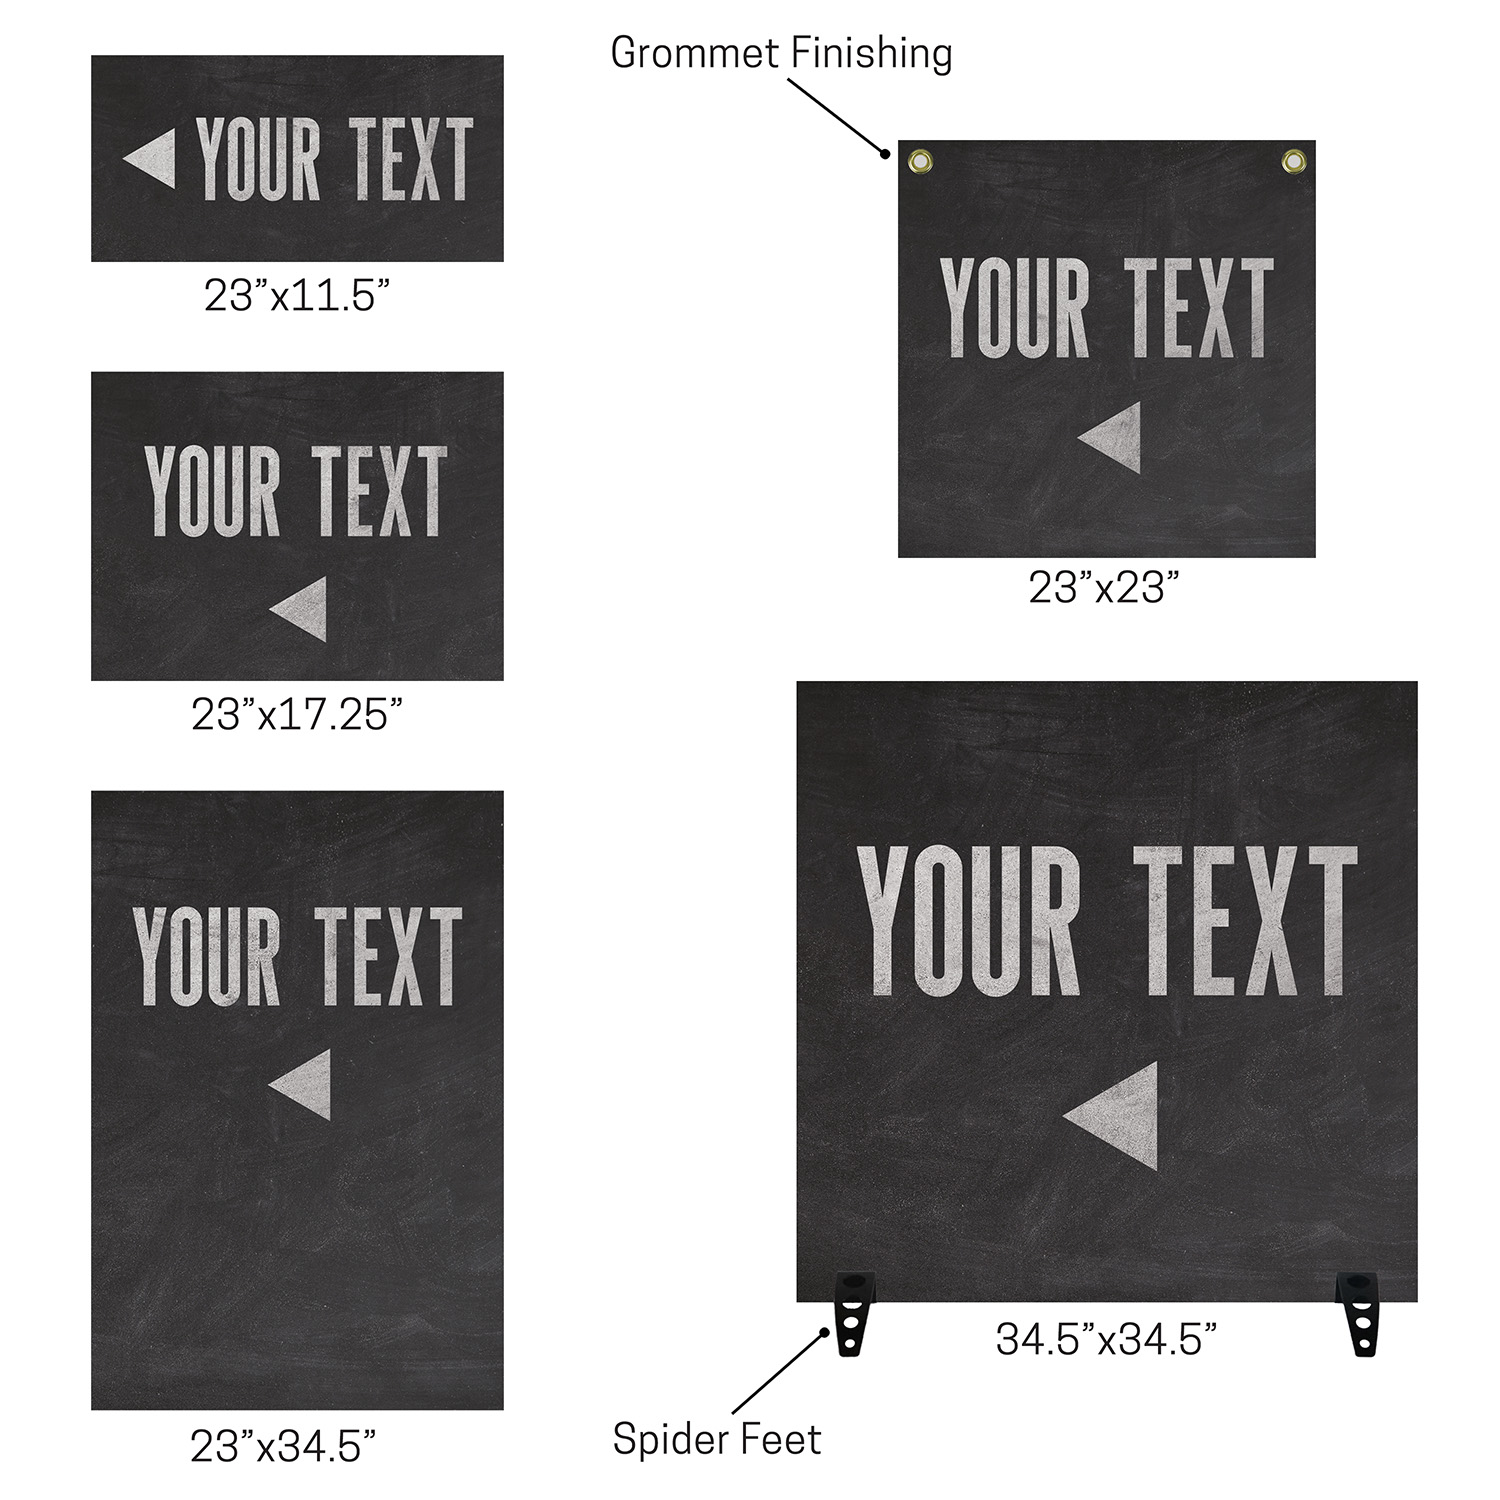 Rigid Signs, Colorful Lights Products, Colorful Lights Your Text, 23 x 34.5 2